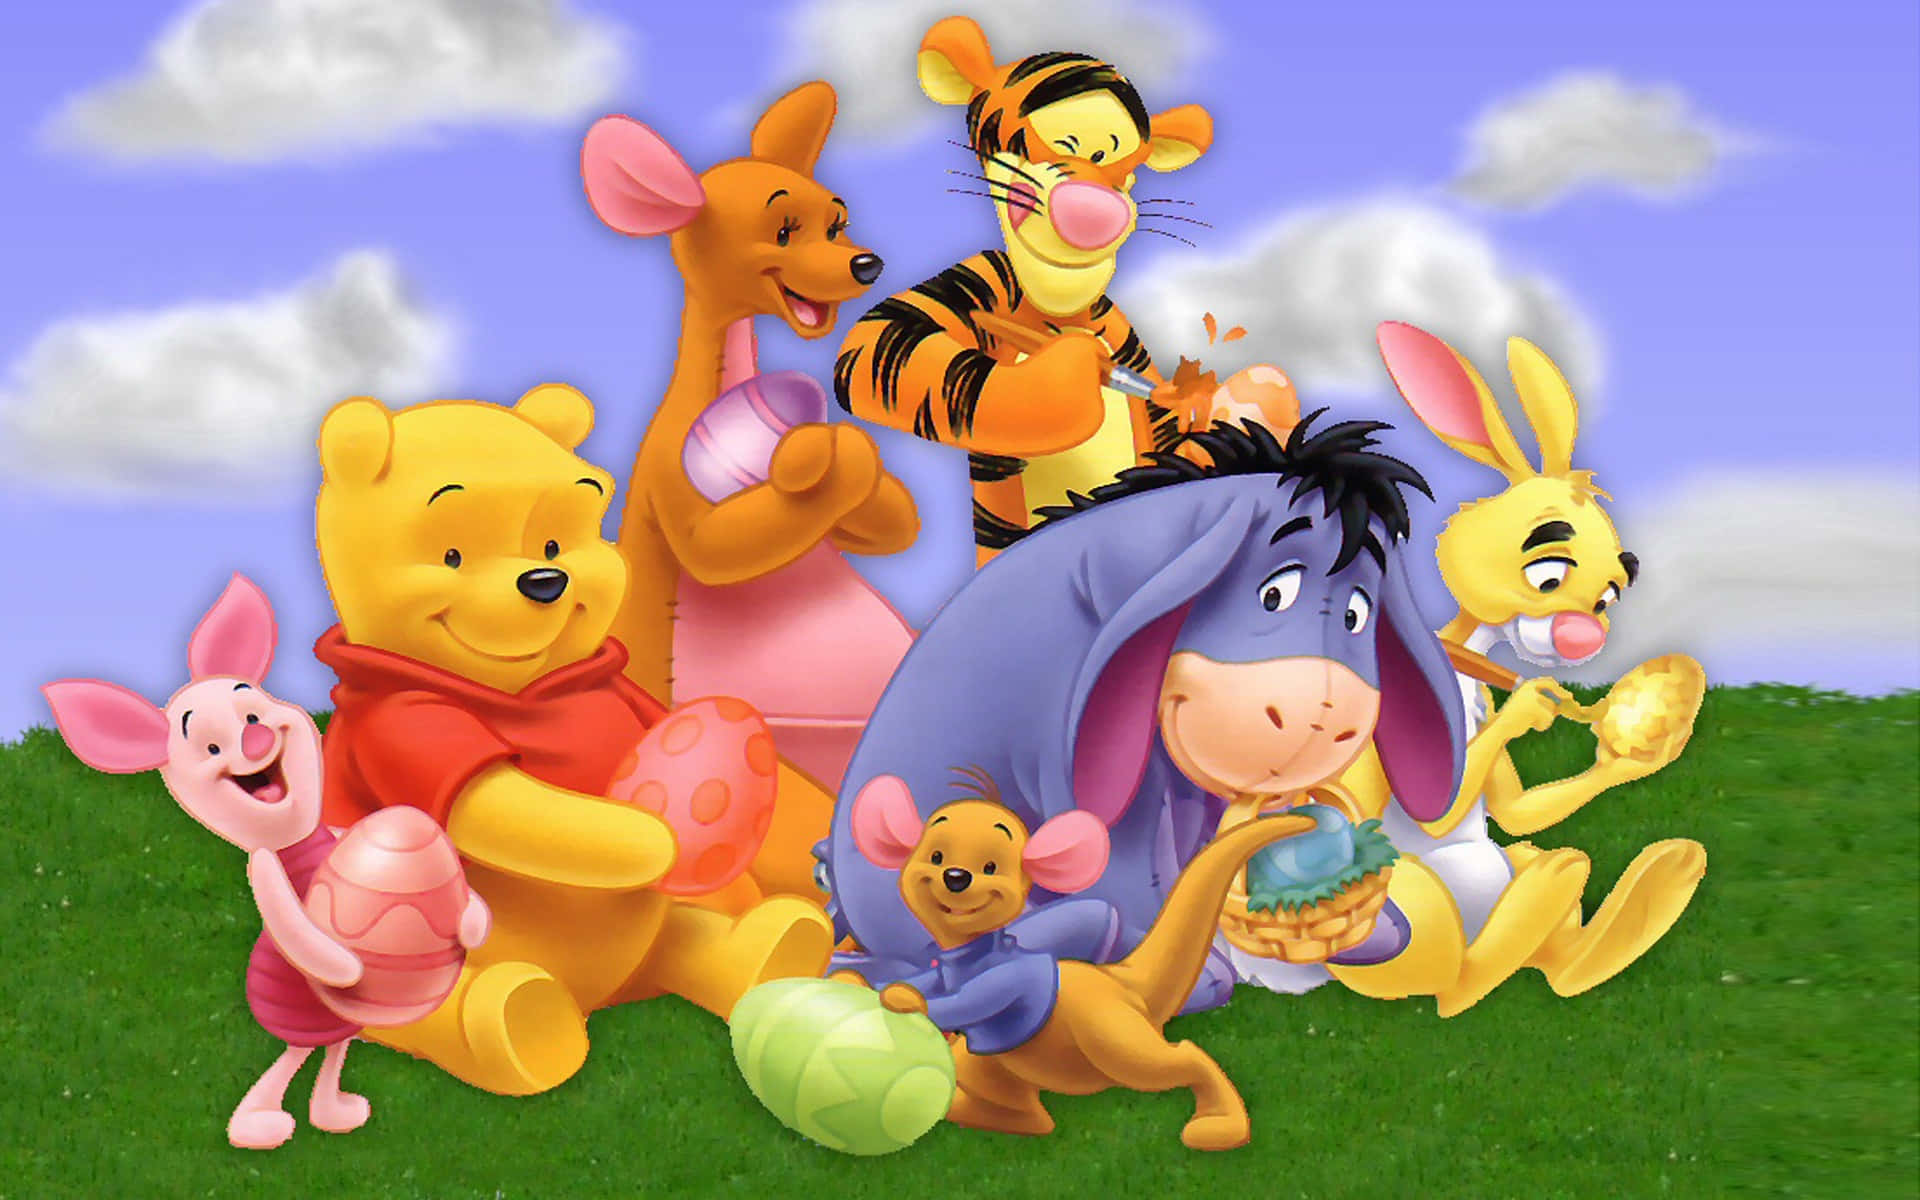 A Classic Treat: Enjoy A Sweet Desktop Wallpaper With Winnie The Pooh Background